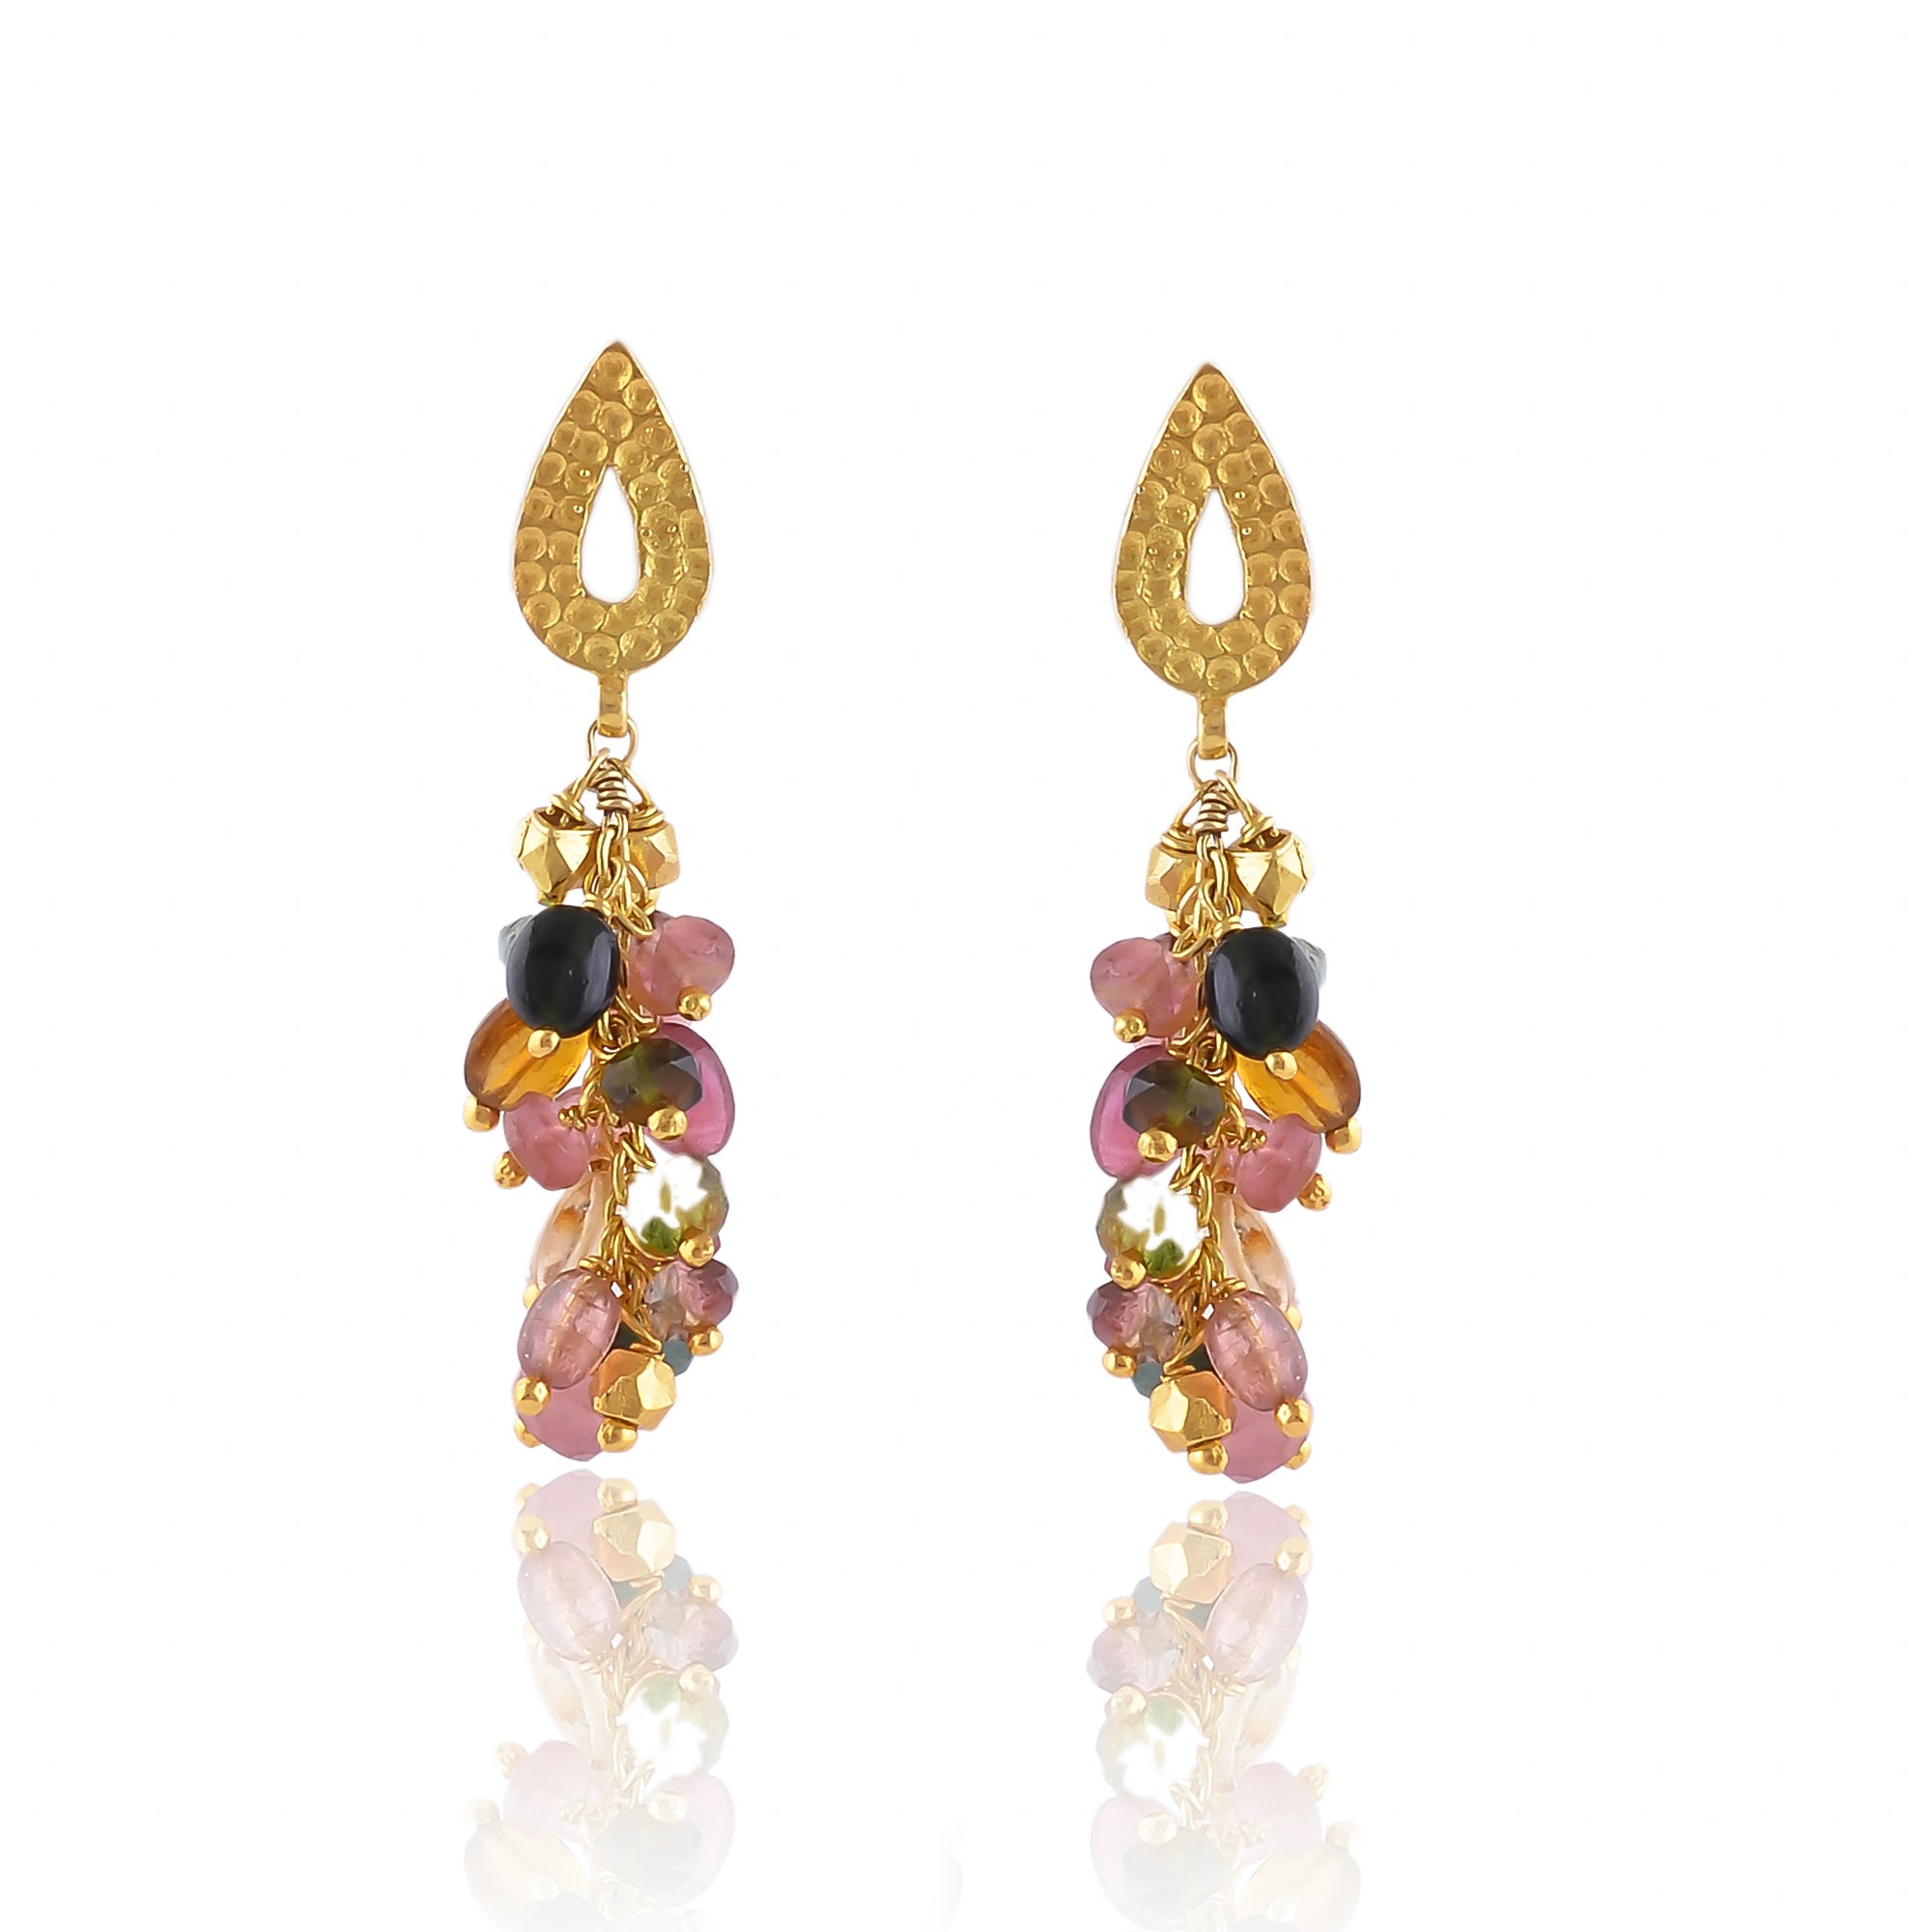 Buy Hand Crafted Silver Gold Plated Tourmaline Cluster Earring